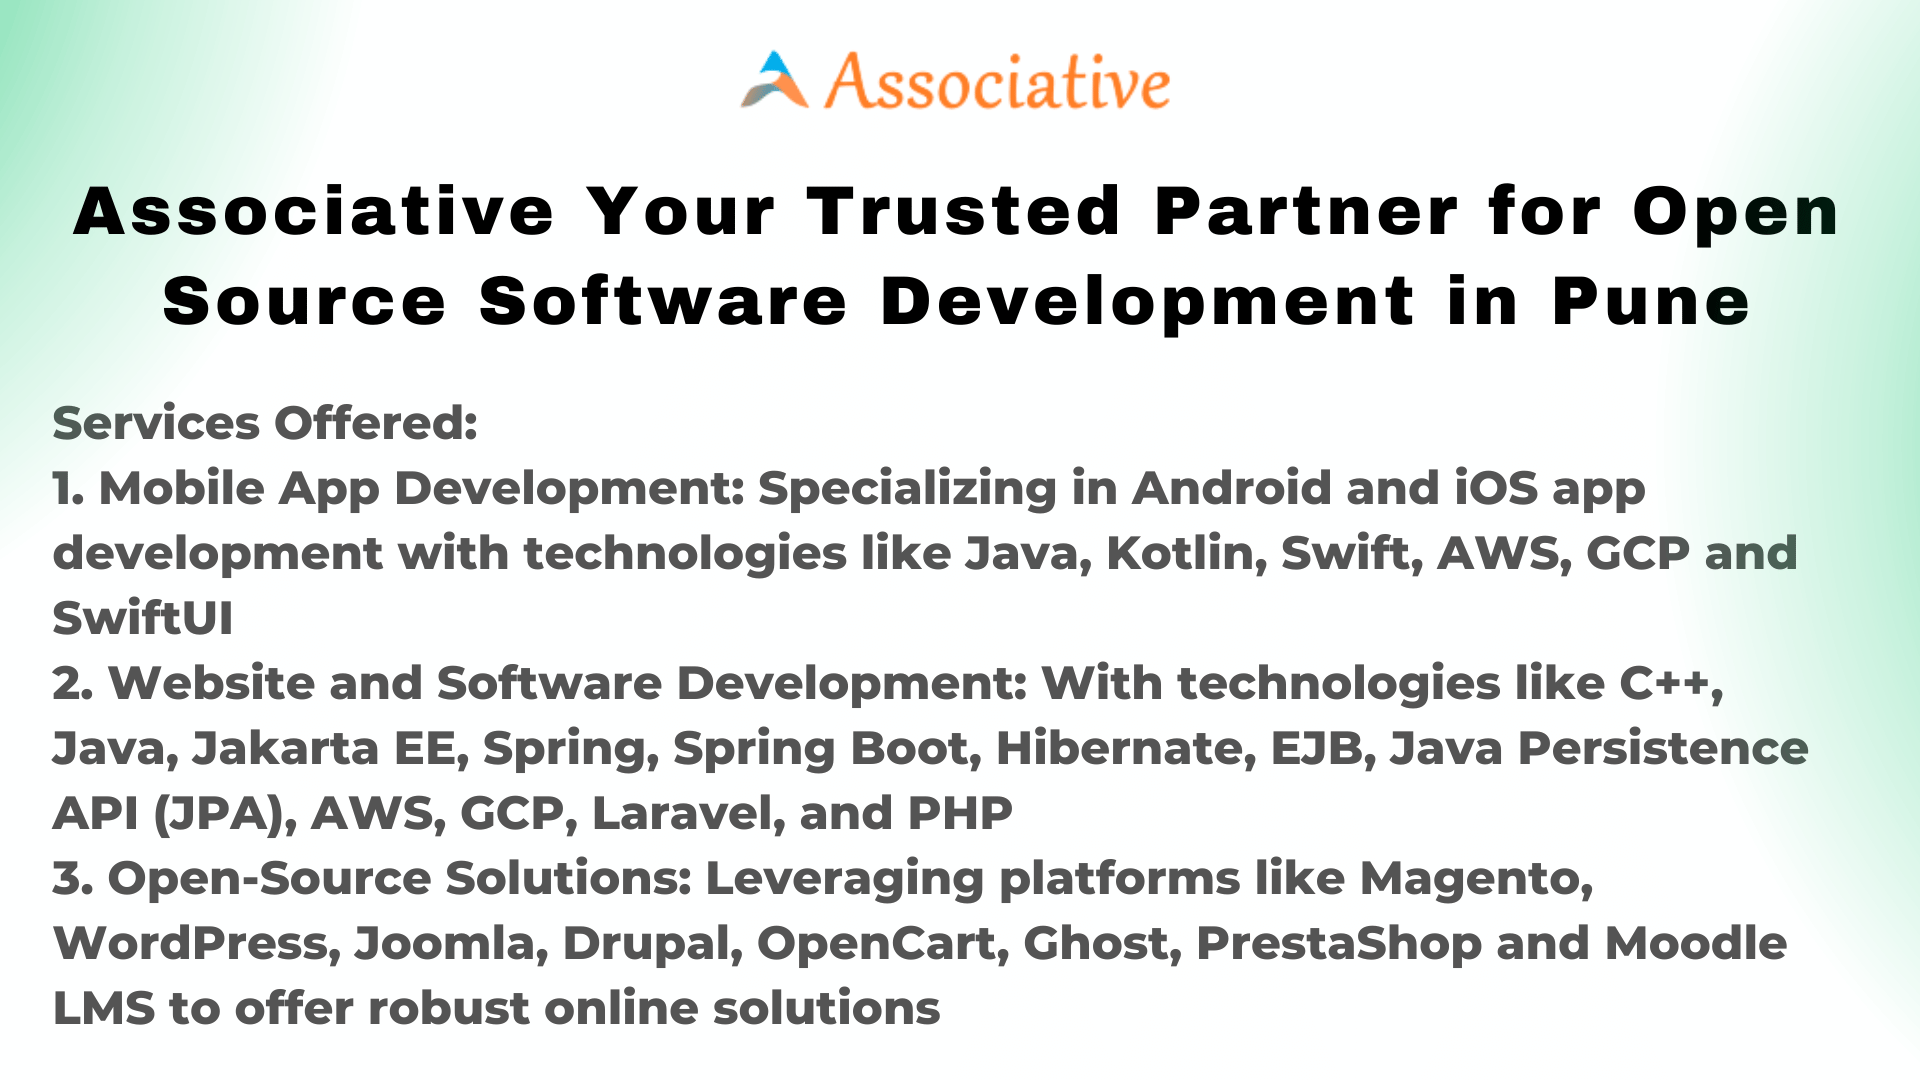 Associative Your Trusted Partner for Open Source Software Development in Pune